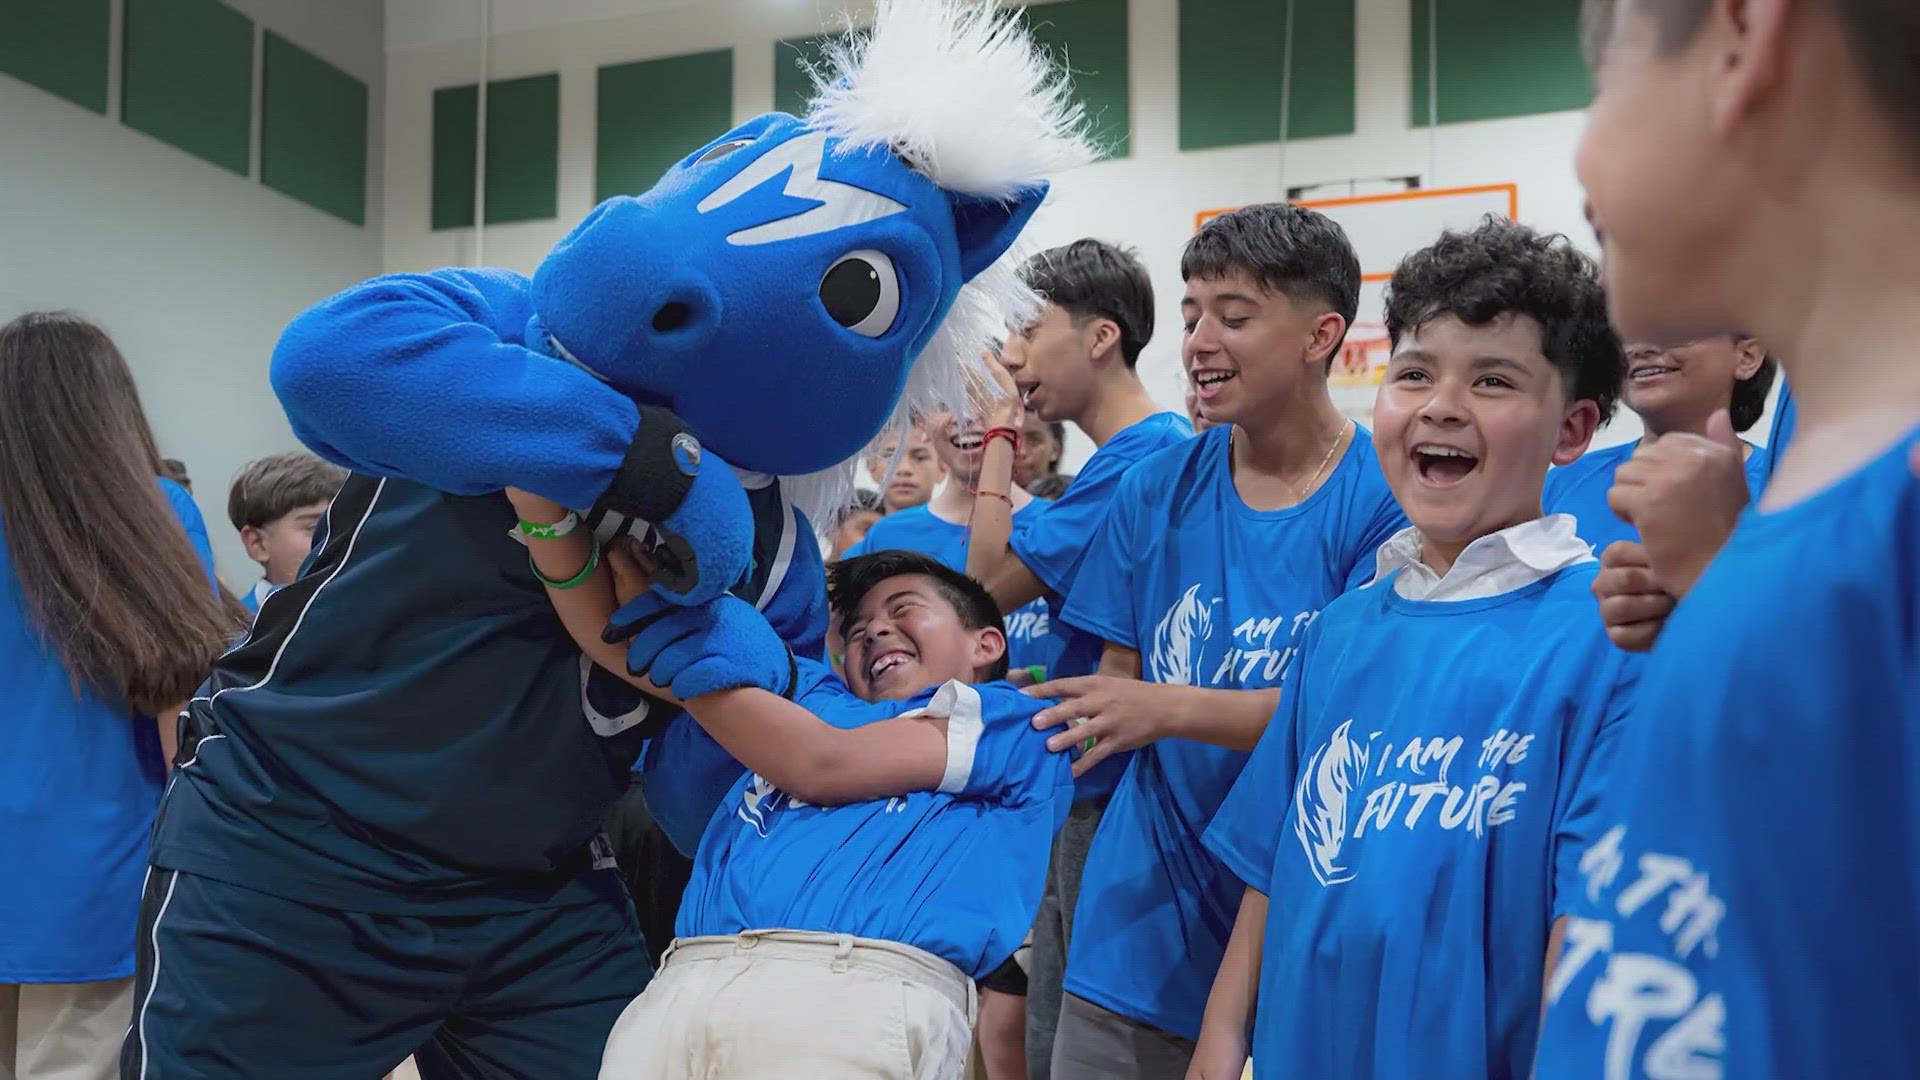 Students at the School for the Talented and Gifted (TAG) in Pleasant Grove got to meet the D-Town crew and Mavs mascot, Champ. They were also gifted shoes!